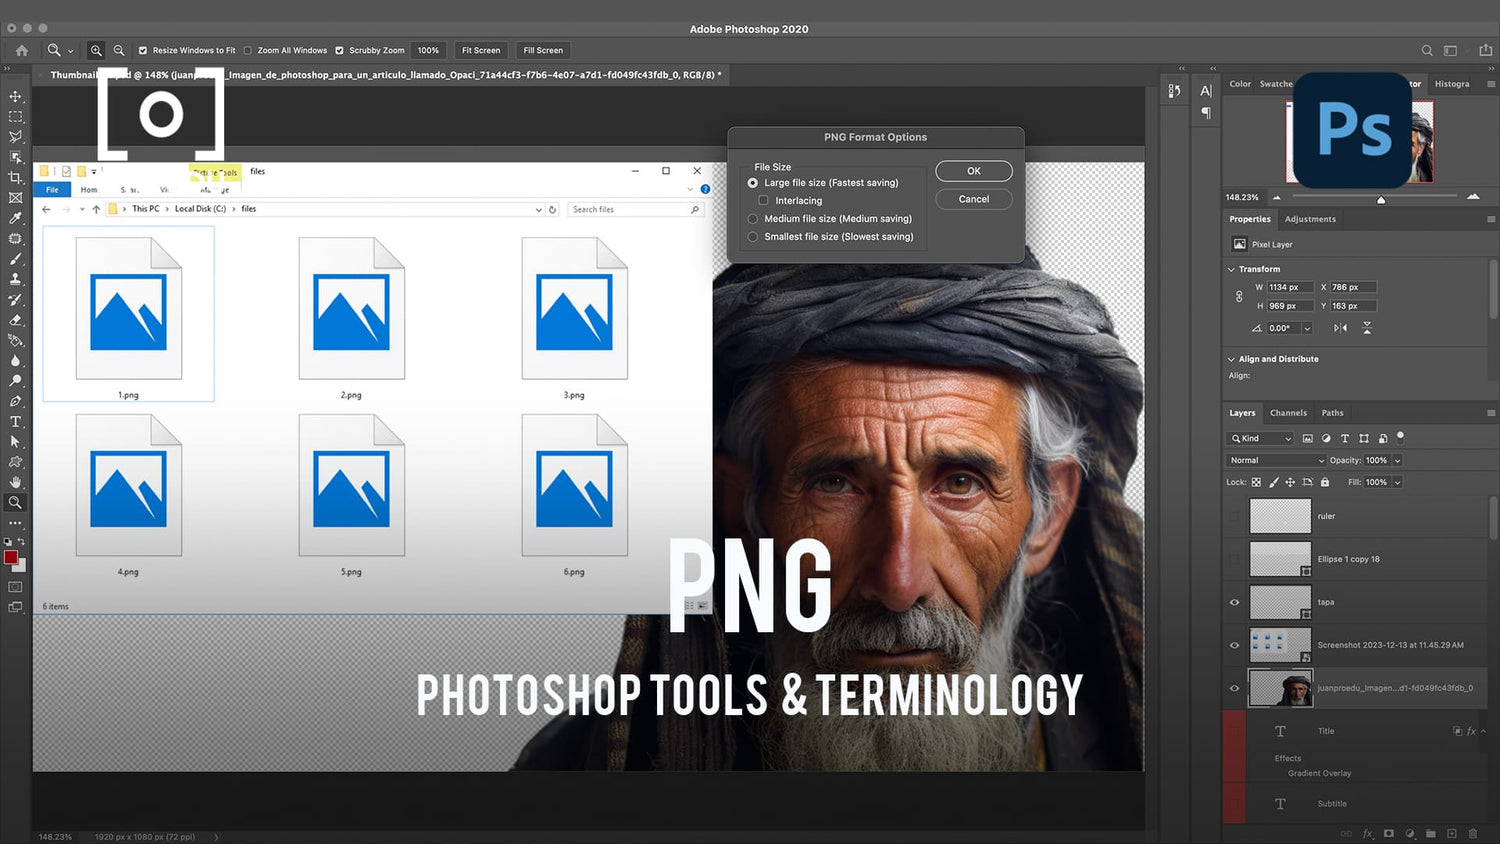 PNG File Format in Photoshop - PRO EDU Guide